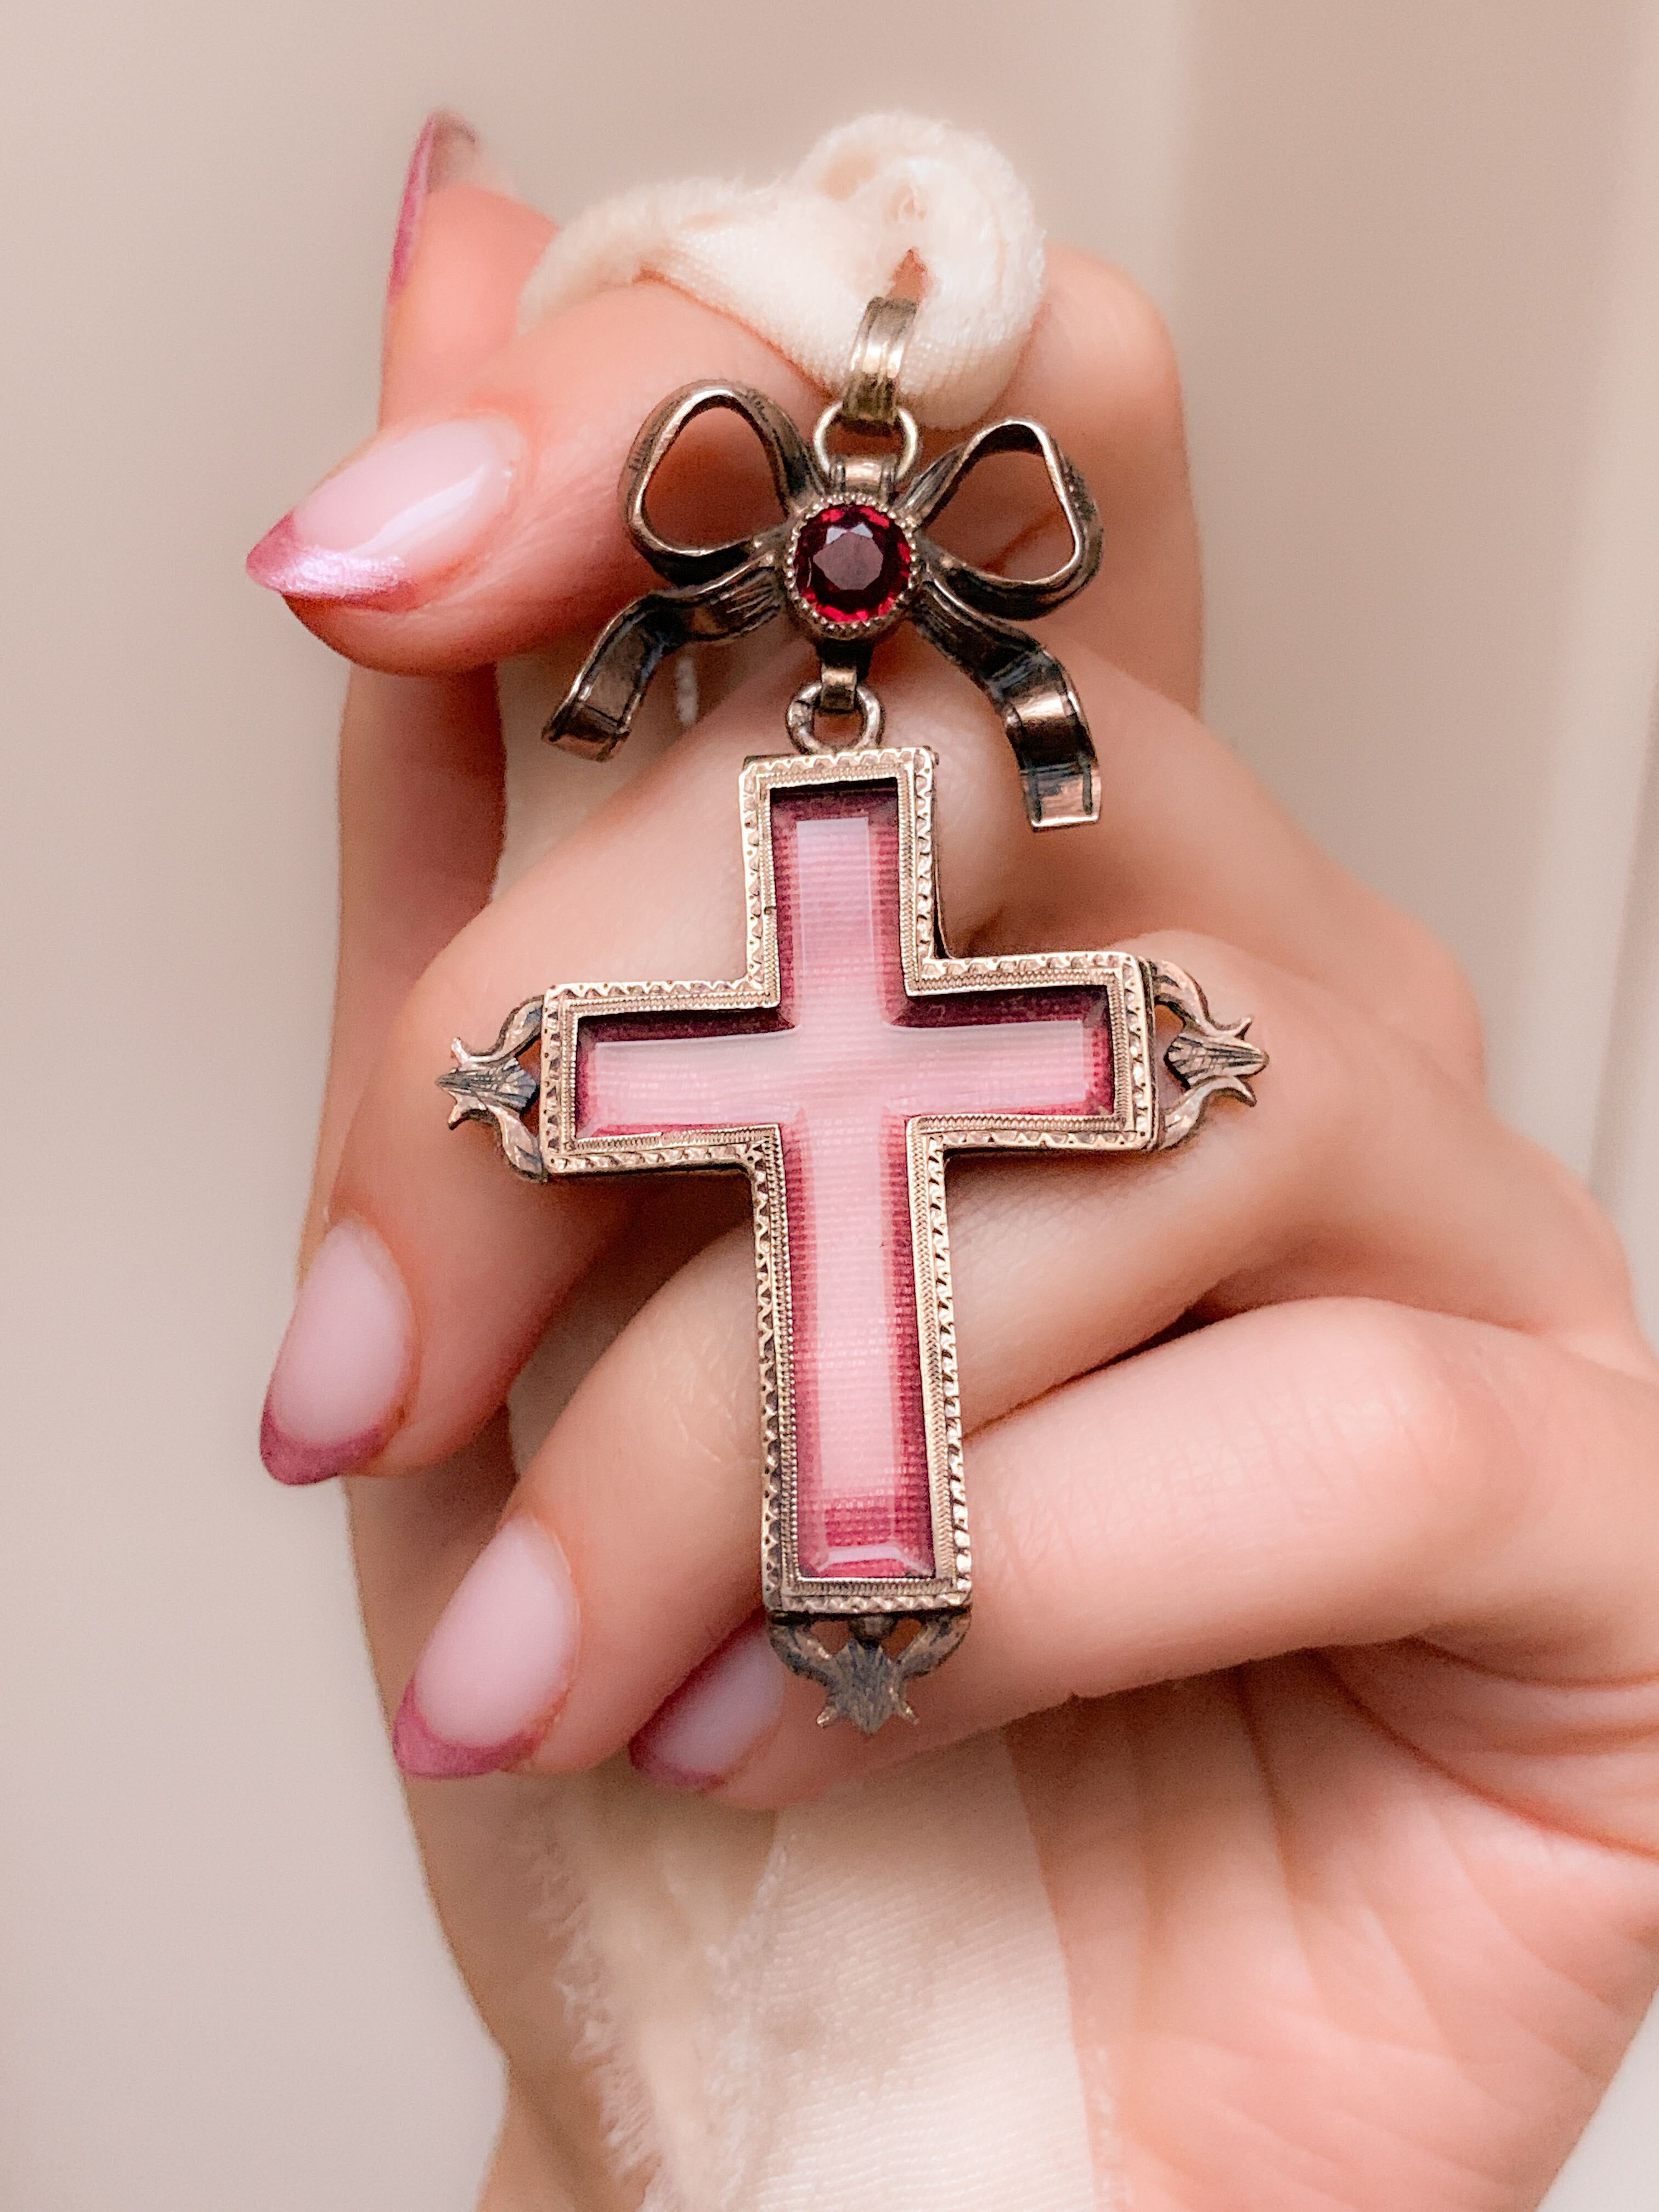 Superb French Cross Reliquary Locket with Garnet Bow